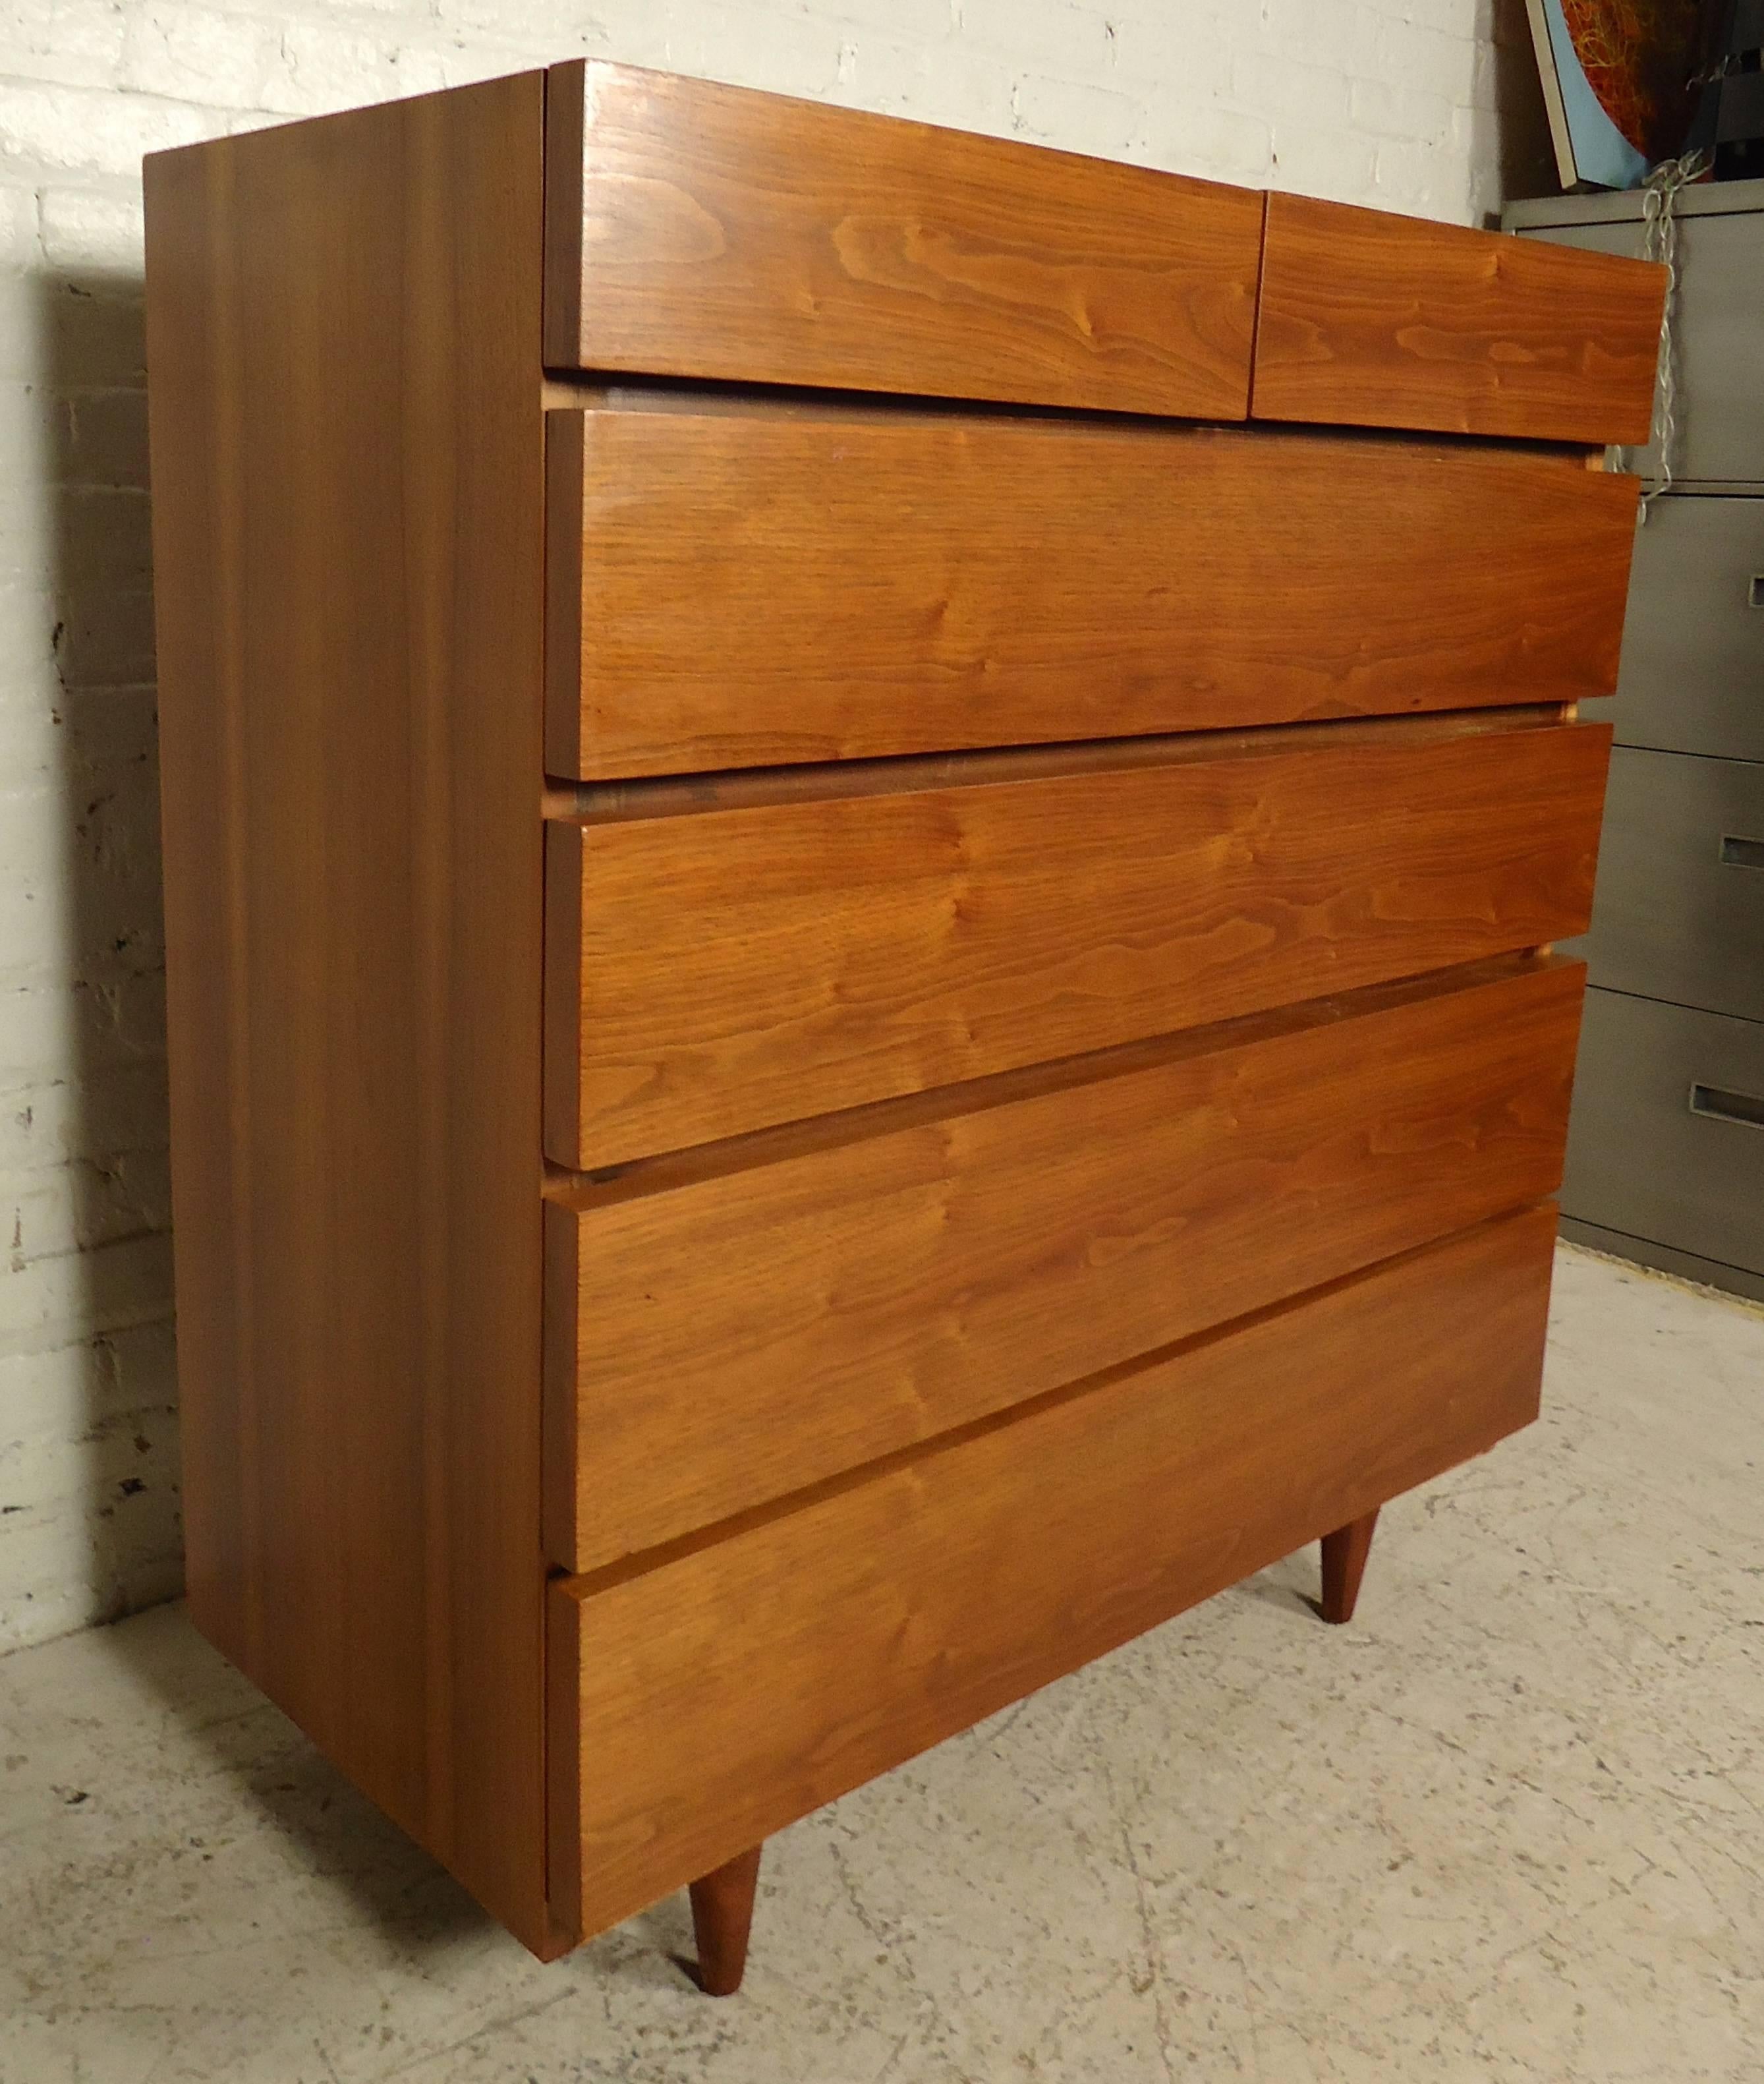 This beautiful vintage modern walnut dresser features four drawers below two small top drawers. Very Classic refinished high boy set on tapered legs.

Please confirm item location (NY or NJ) with dealer.